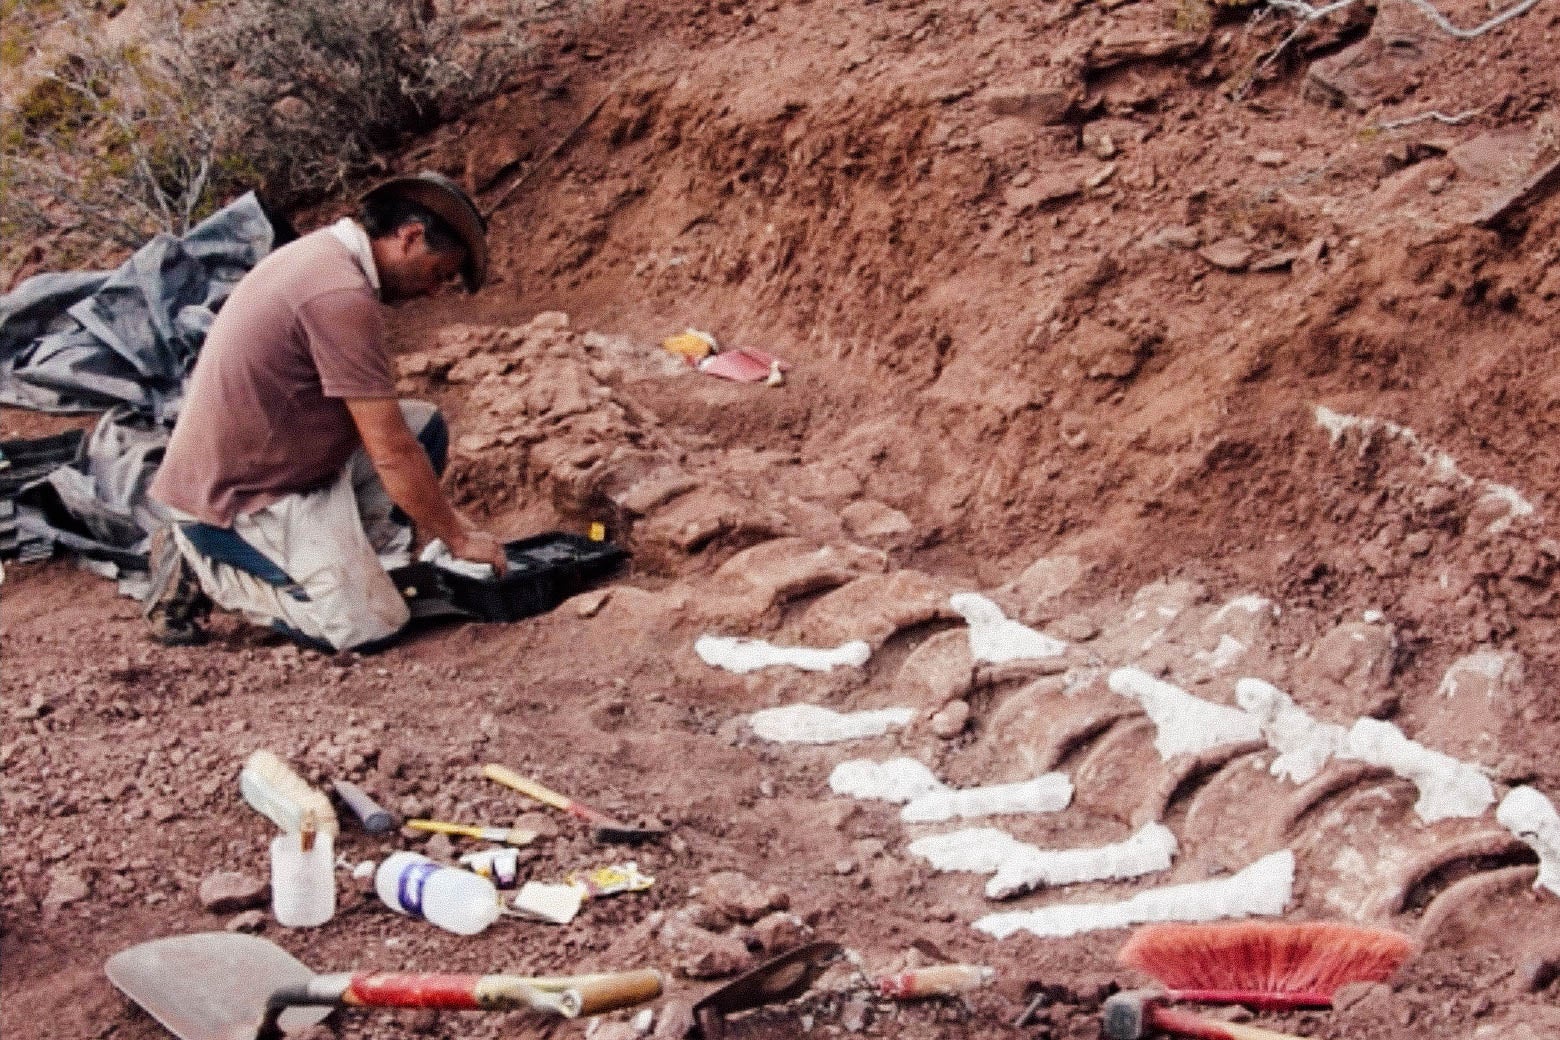 A man kneels in red dirt in which large fossilized vertebrae are partially buried.